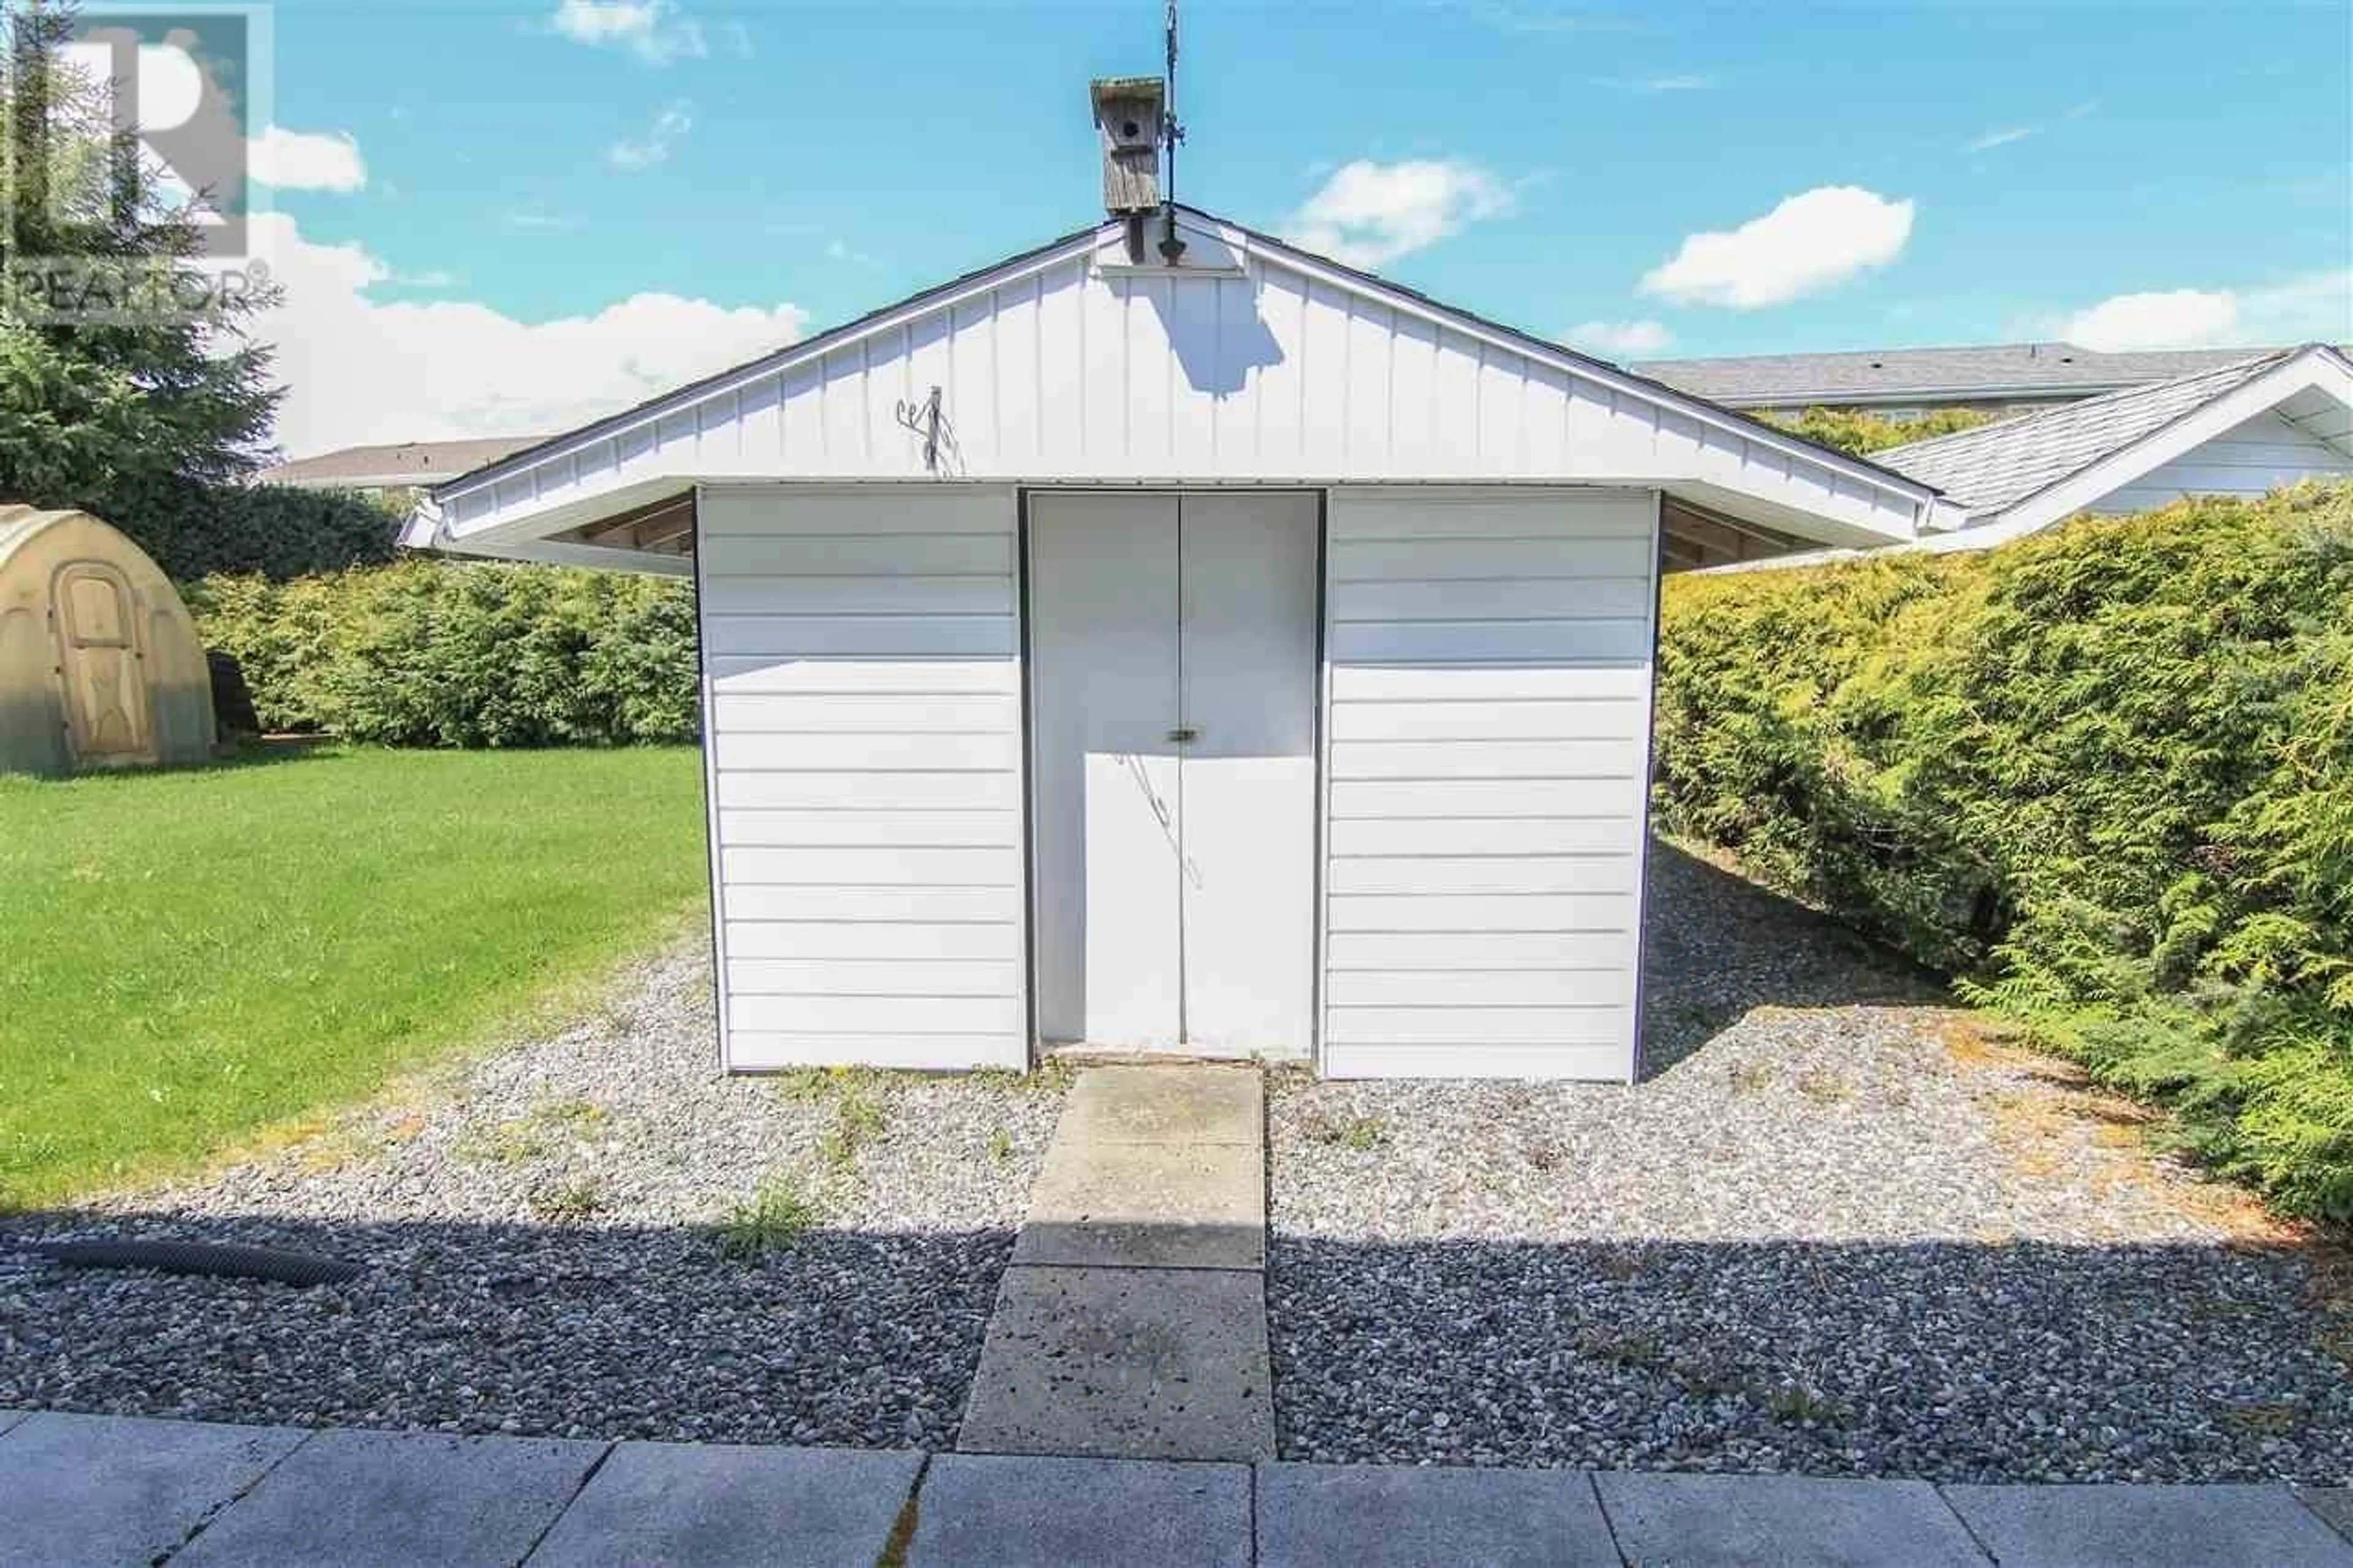 Shed for 75 SPARKS AVENUE, Kitimat British Columbia V8C2R6